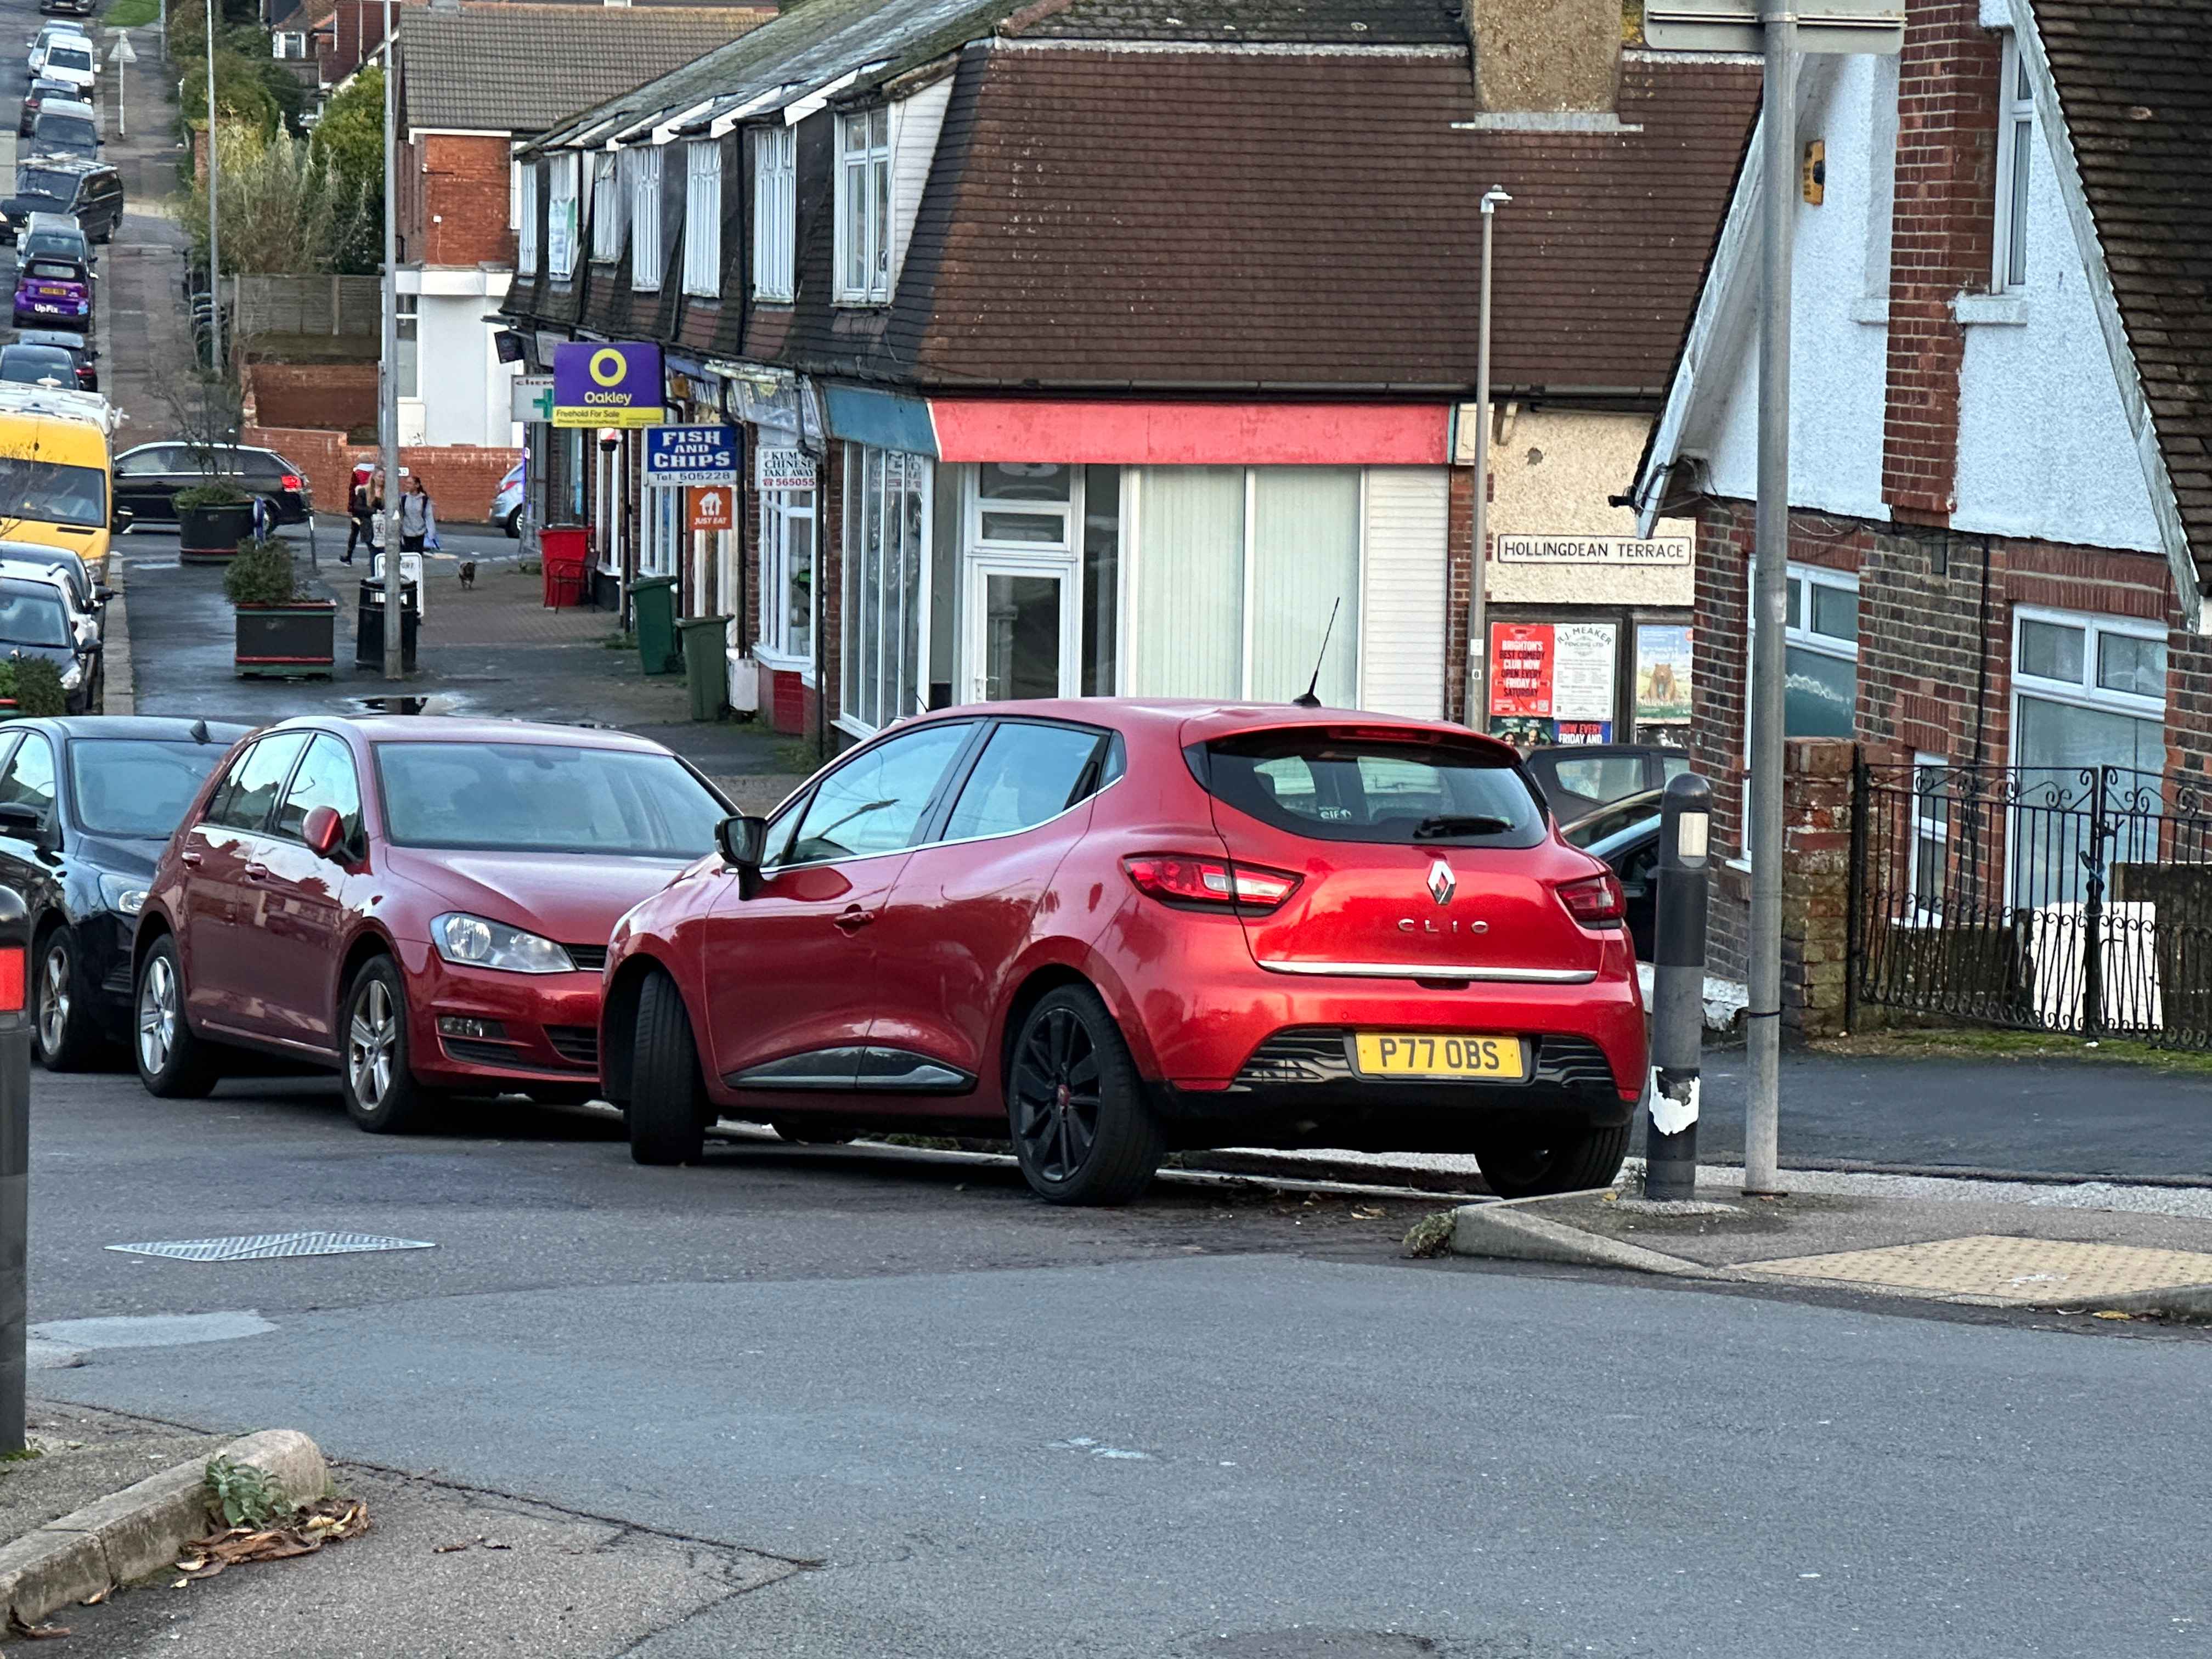 Photograph of P77 OBS - a Red Renault Clio parked in Hollingdean by a non-resident. The first of four photographs supplied by the residents of Hollingdean.